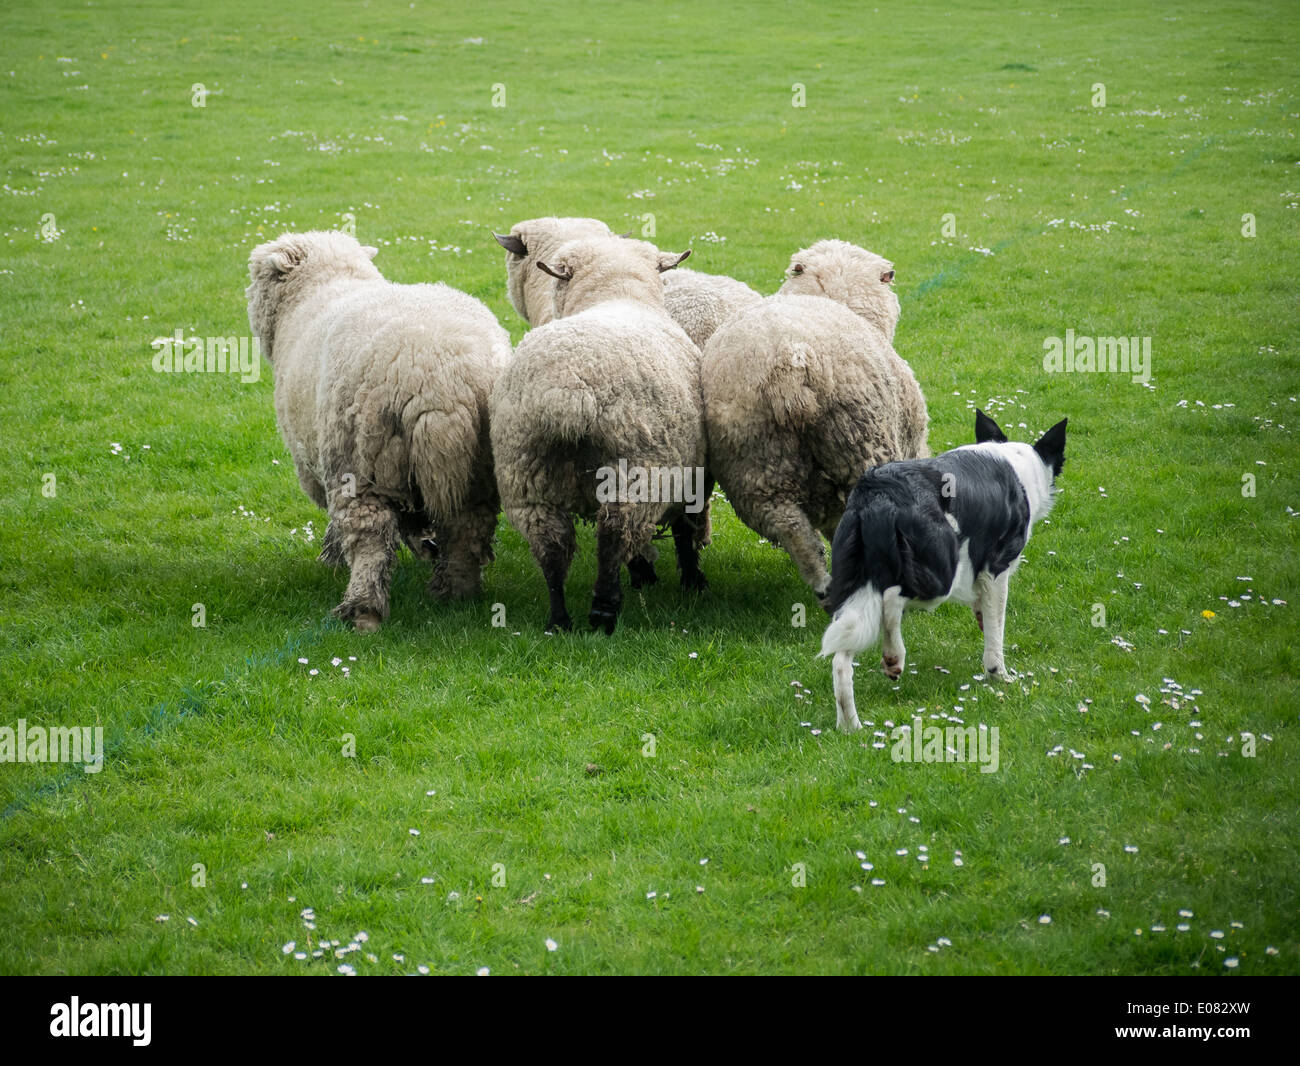 A Border Collie sheep dog rounds up sheep in a field Stock Photo